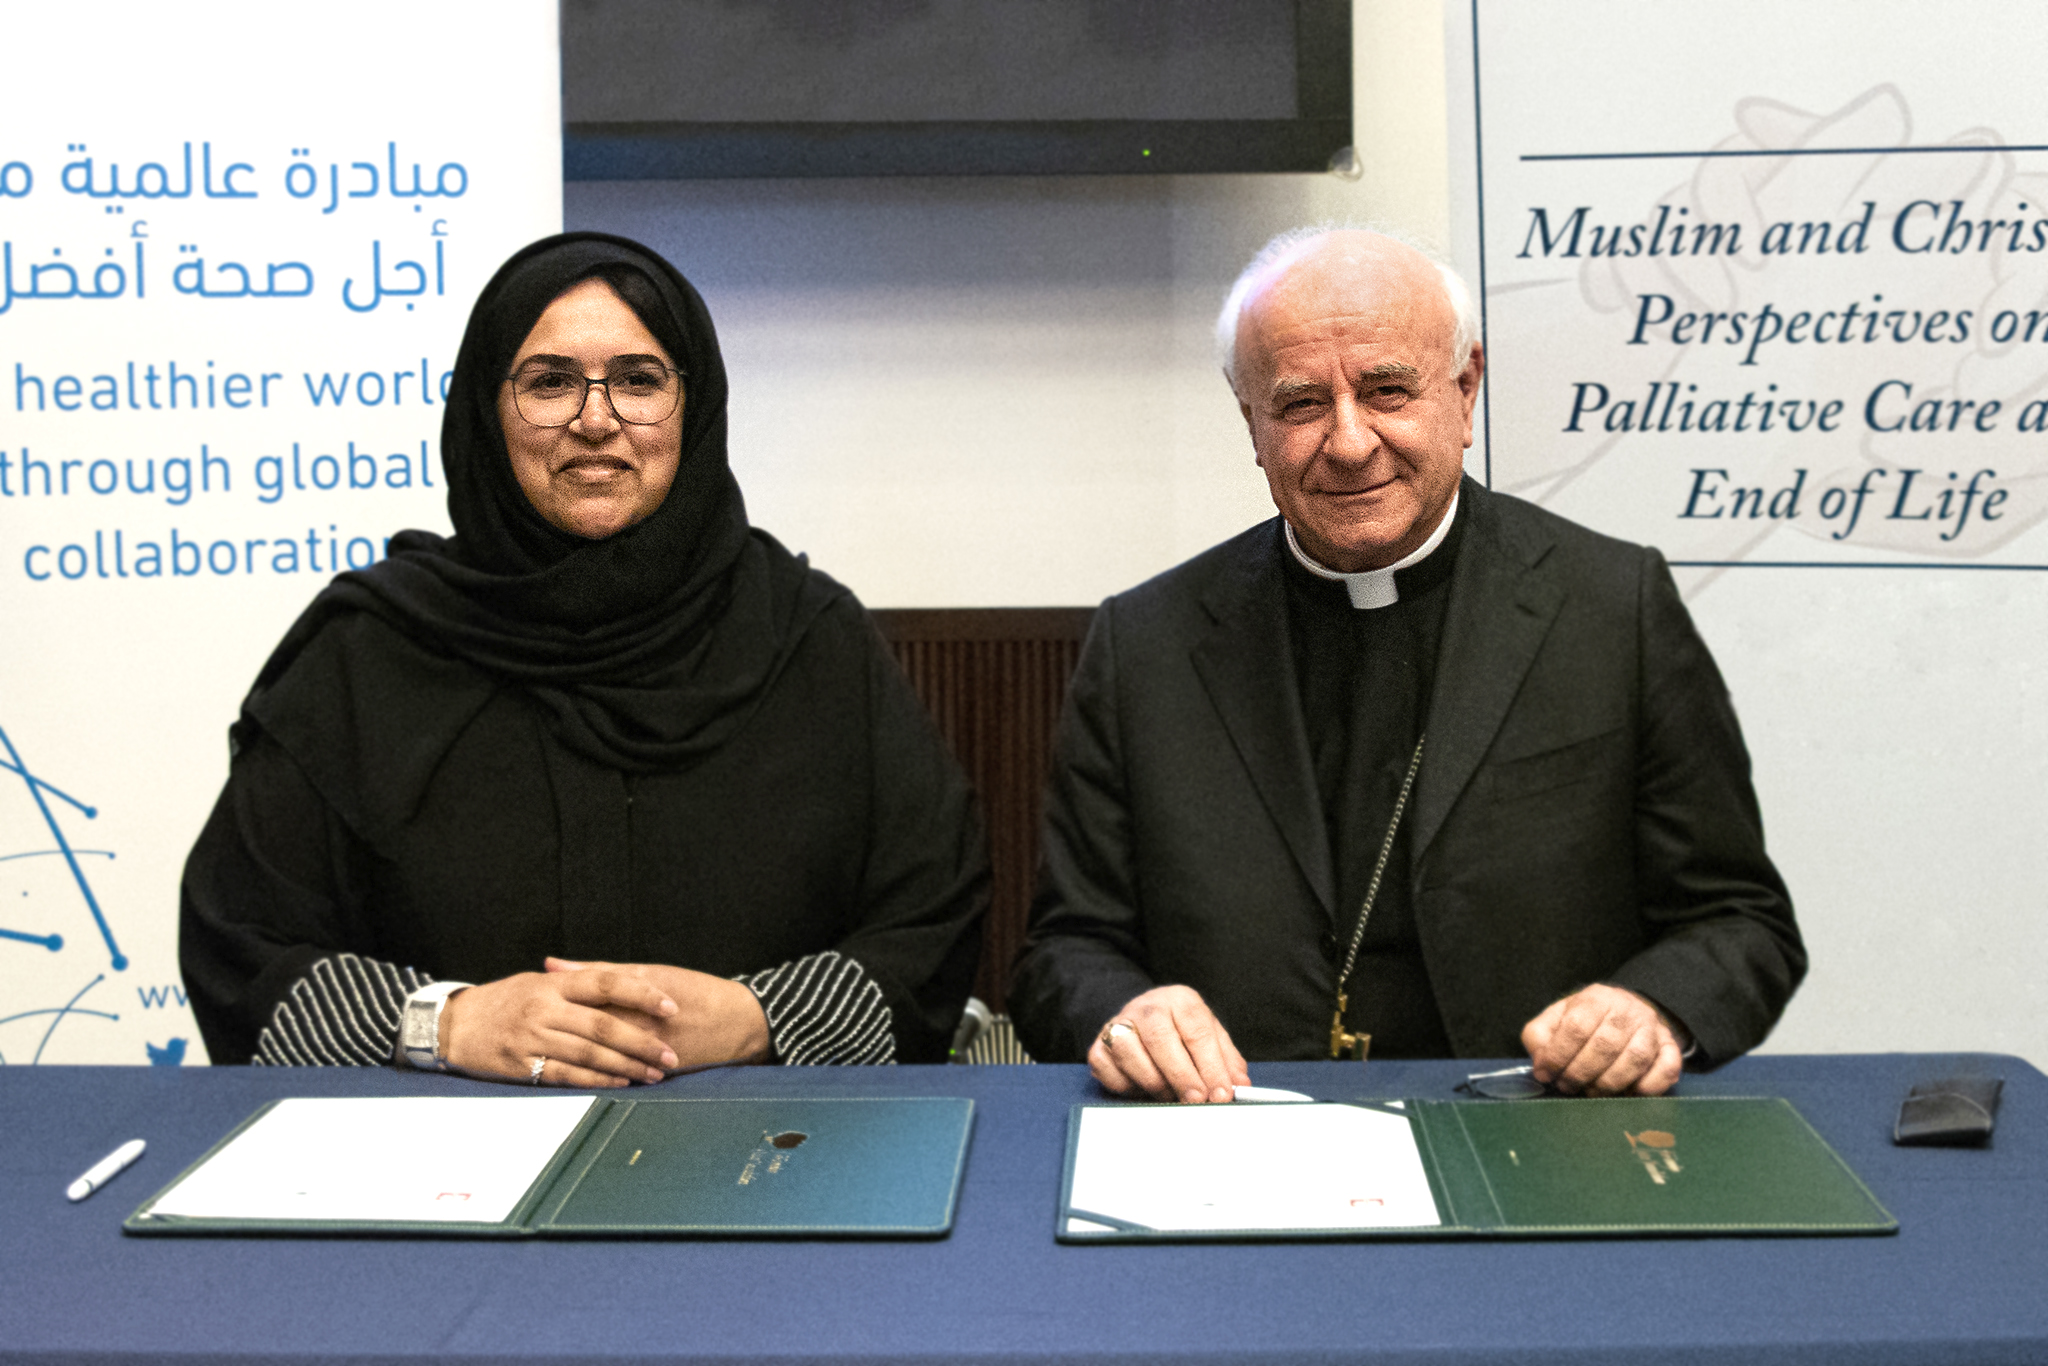 WISH To Co-Host Symposium In Rome To Seek Ways Of Enhancing Relationship Between Religion And Medical Ethics